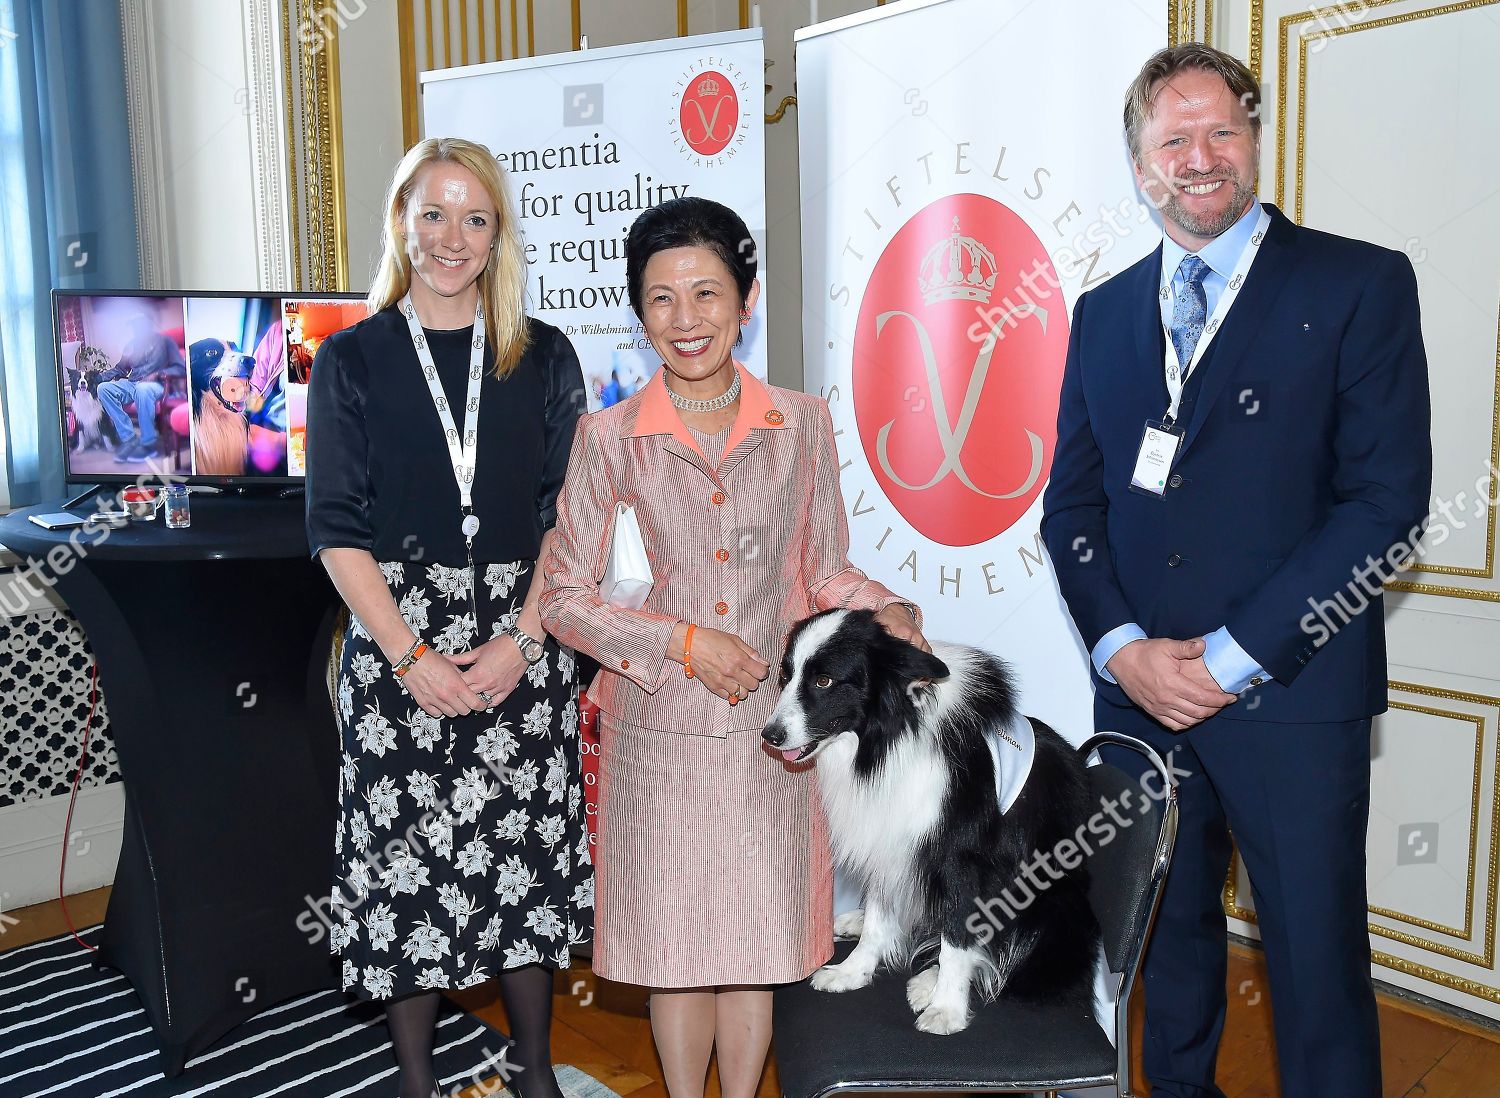 dementia-forum-x-at-the-royal-palace-stockholm-sweden-shutterstock-editorial-10237450p.jpg